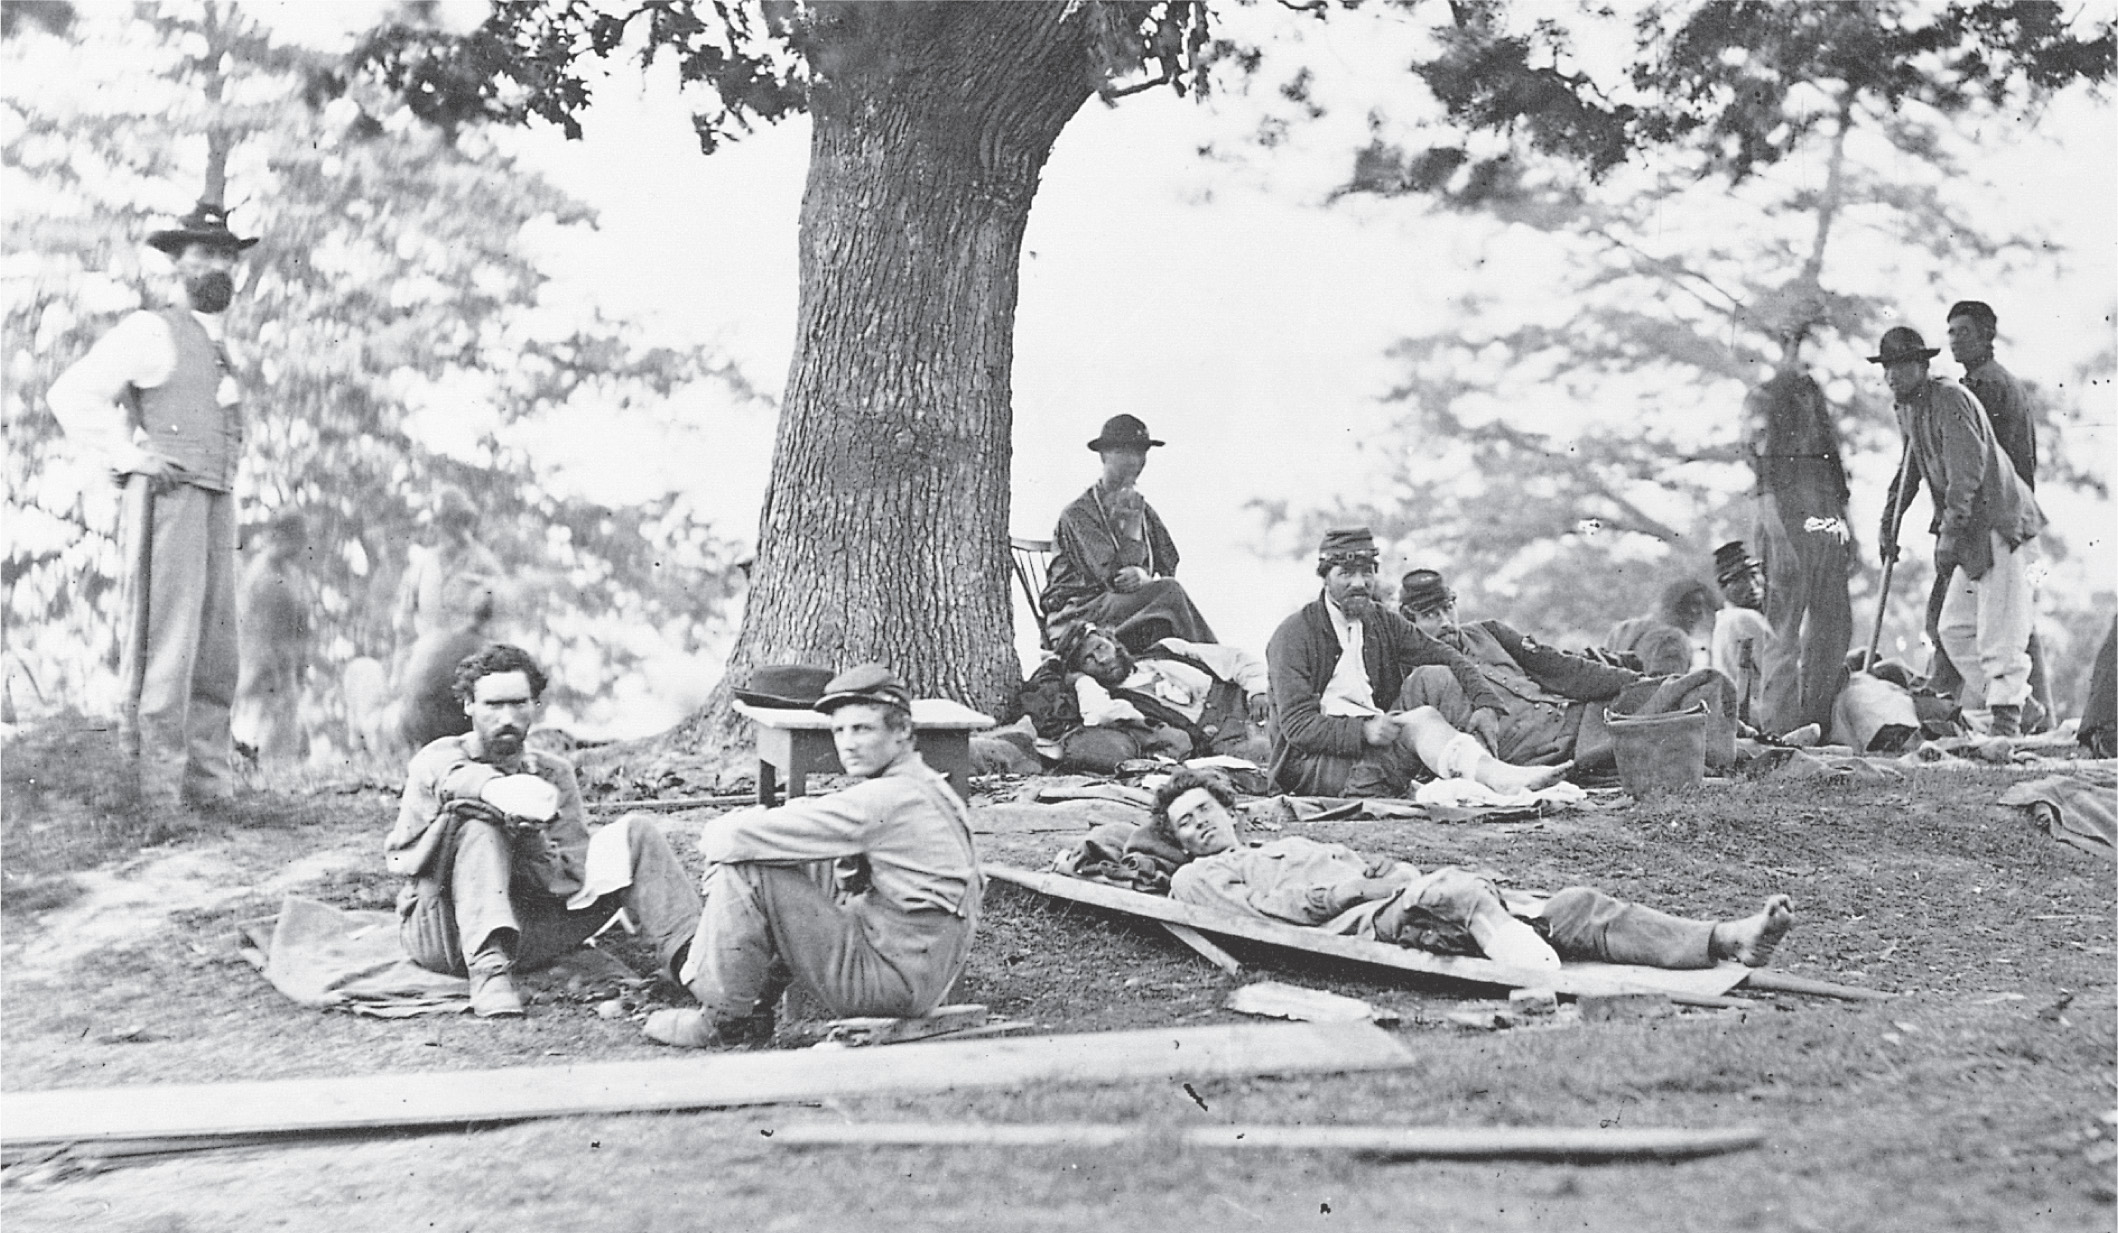 A photo: Union soldiers, some wounded, relax under a tree.